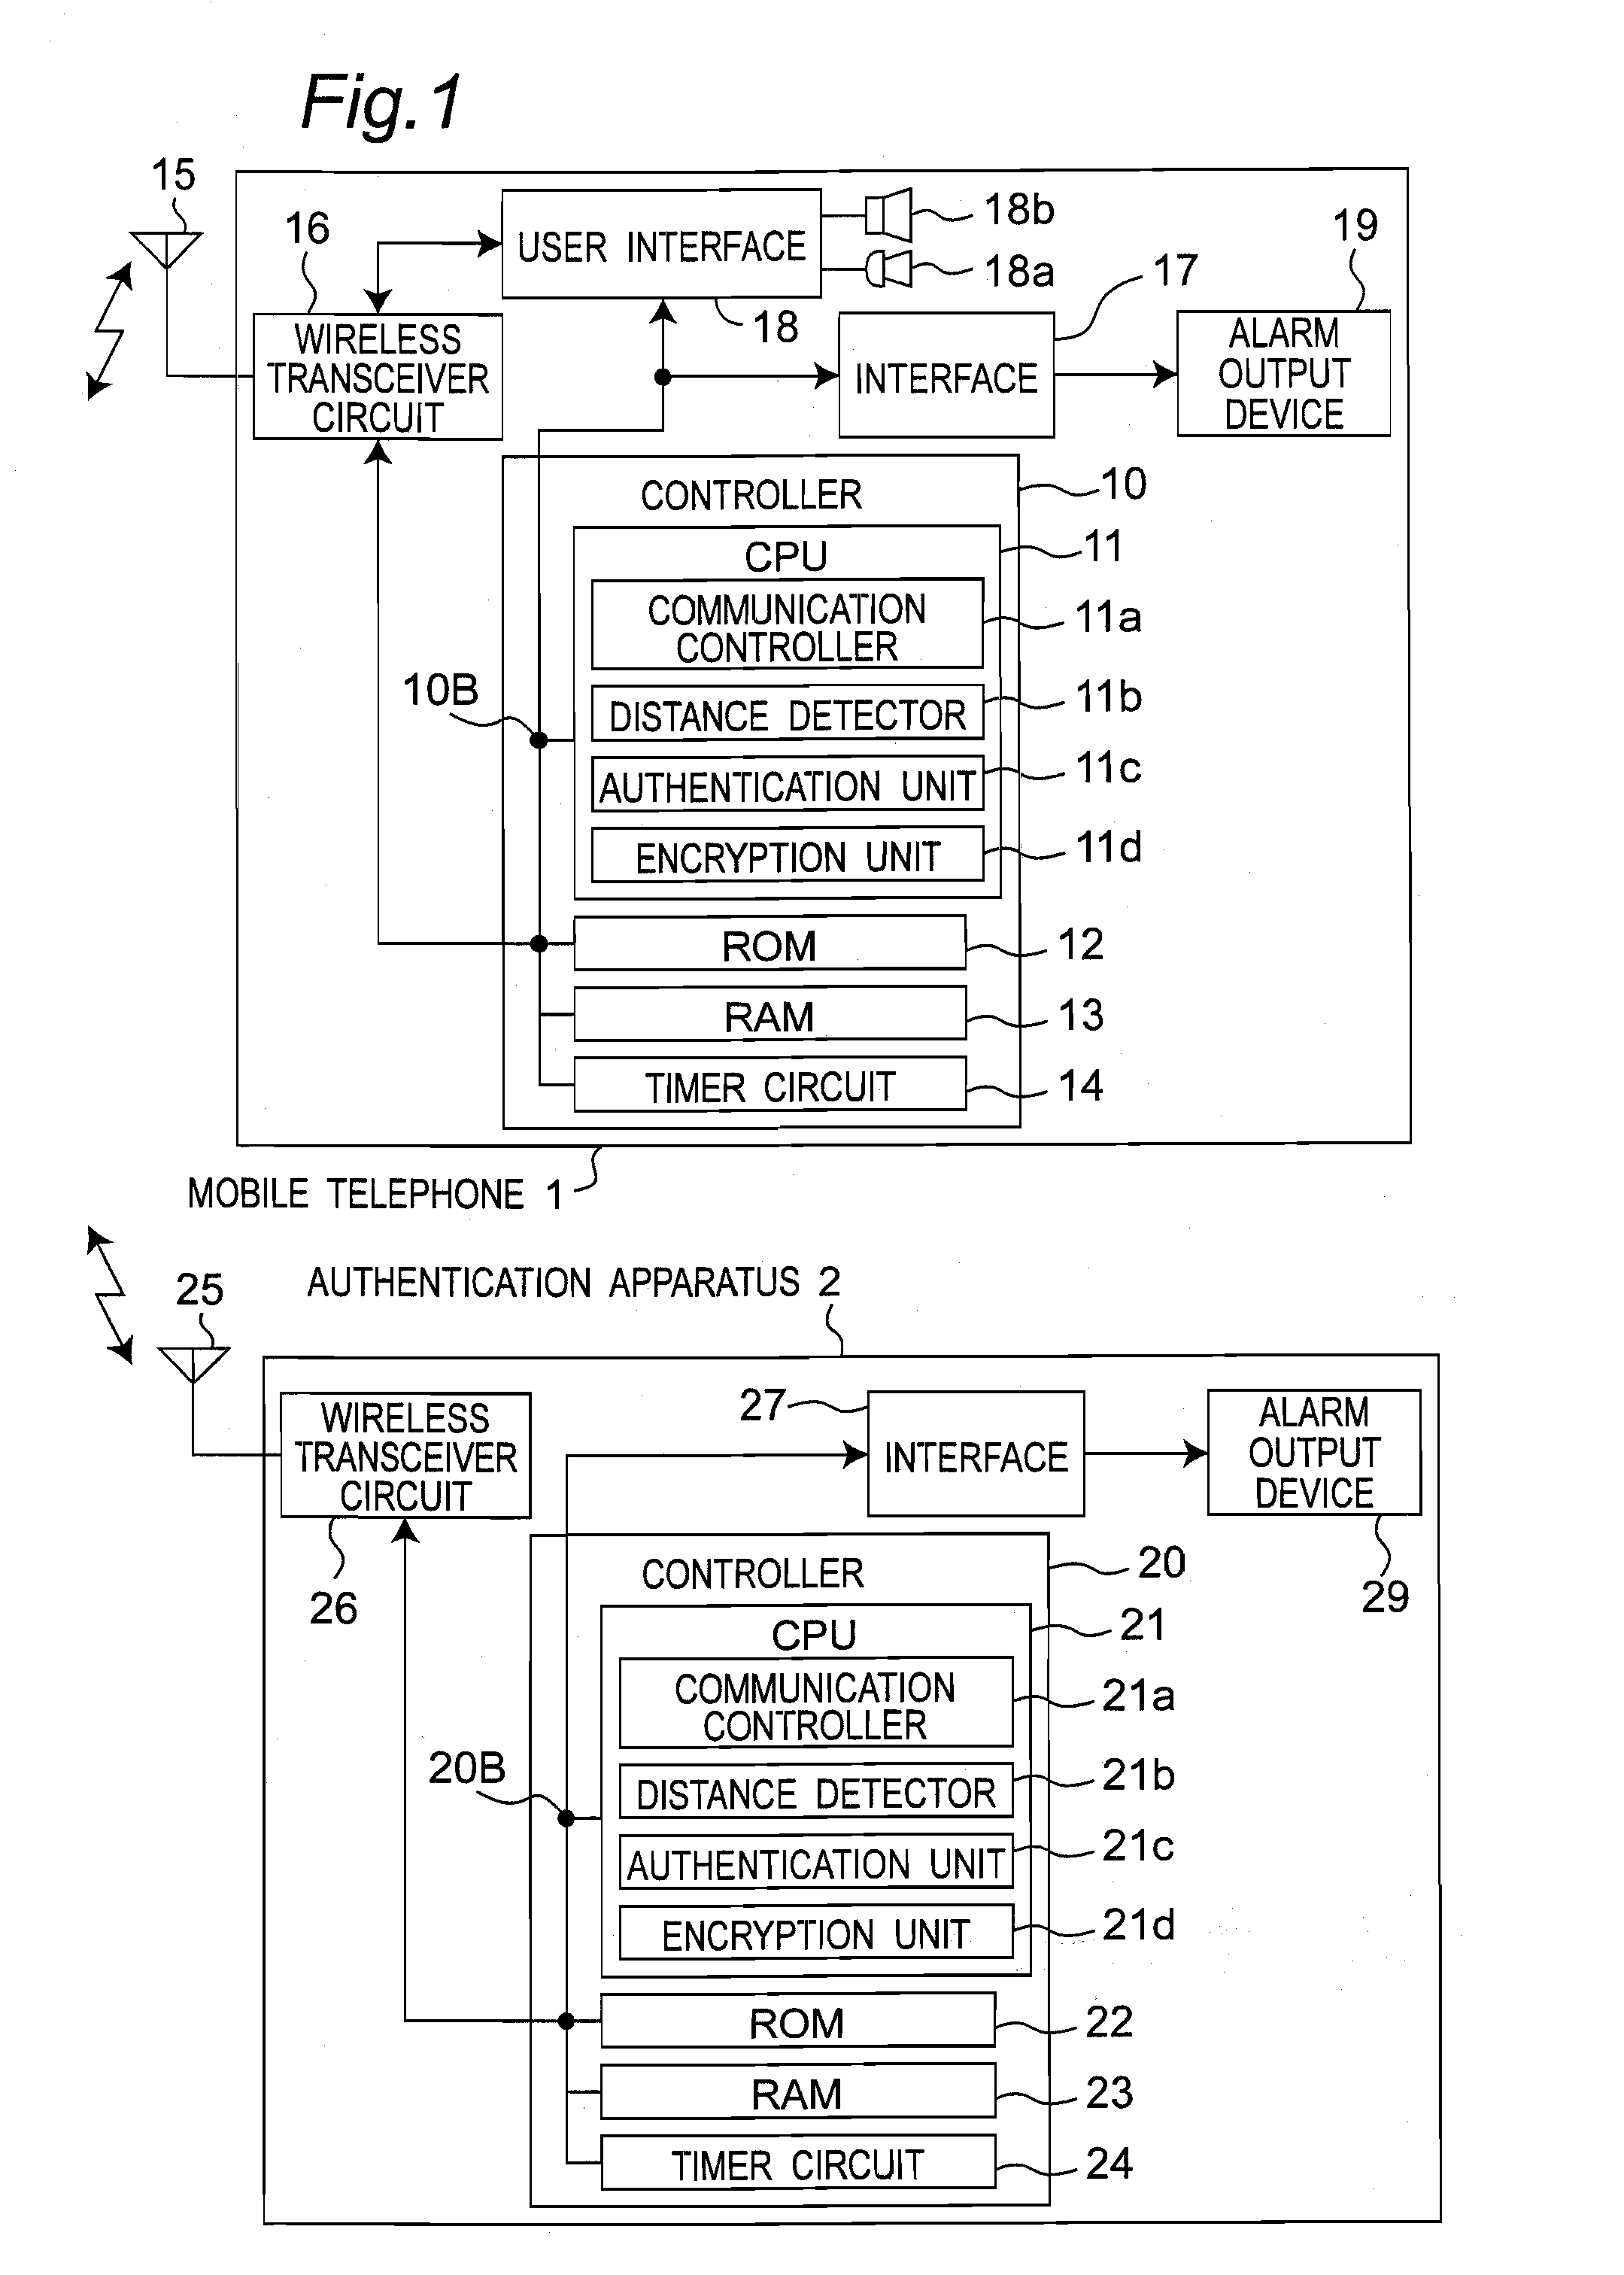 Wireless device monitoring system including unauthorized apparatus and authentication apparatus with security authentication function